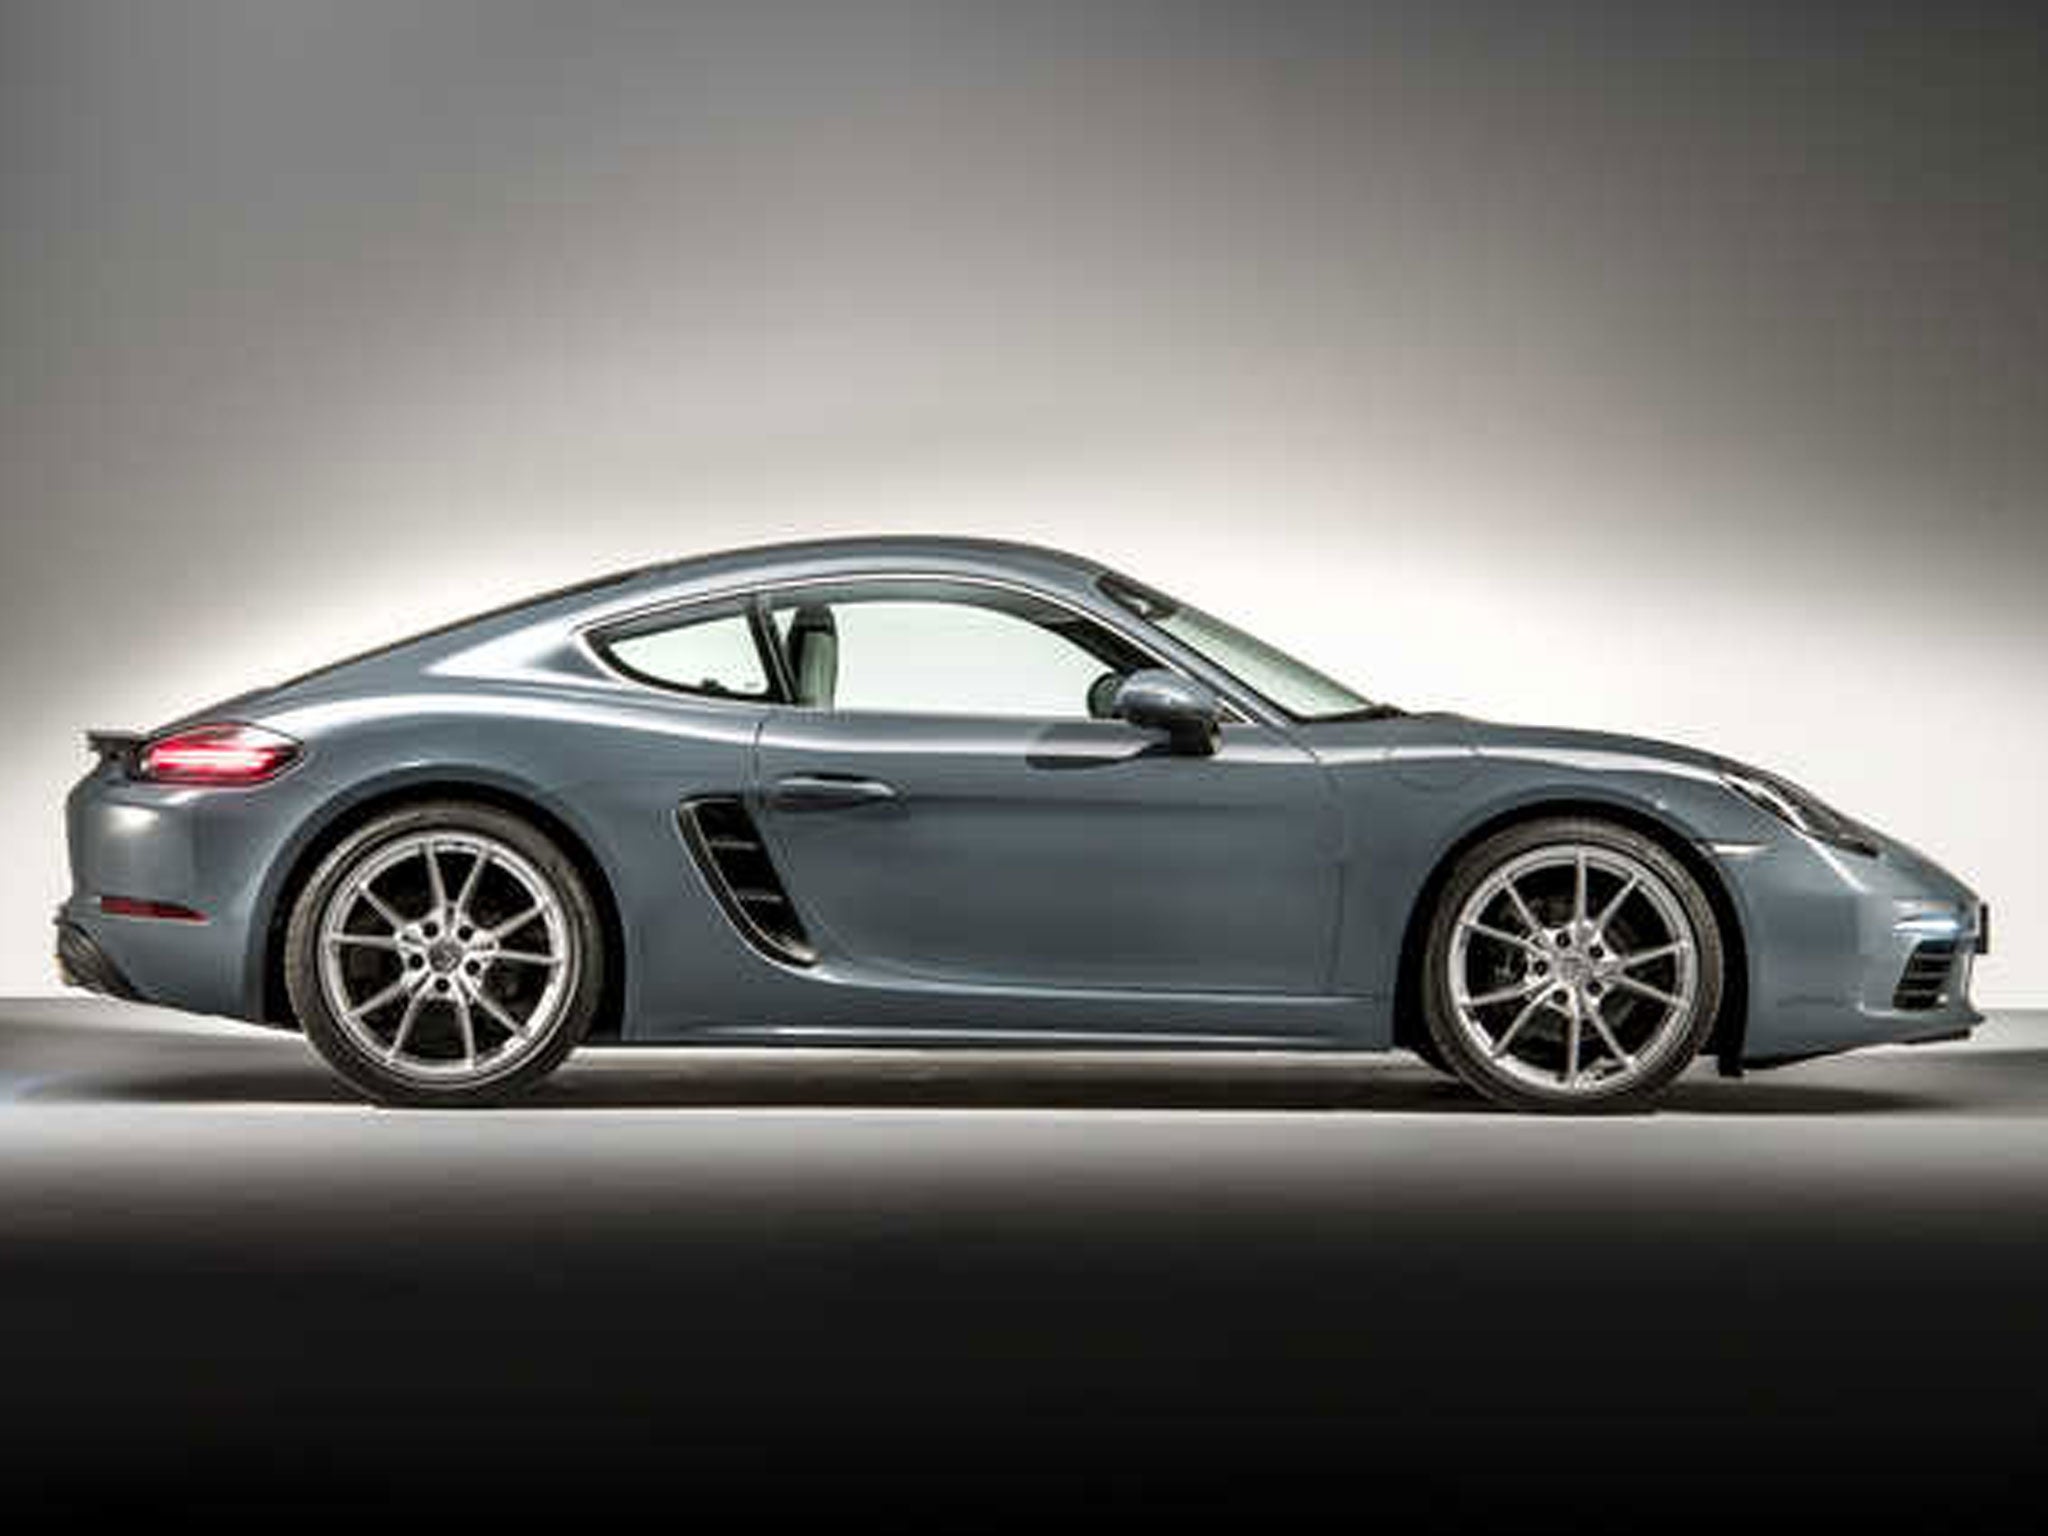 The reworked Cayman is set to arrive in showrooms in September